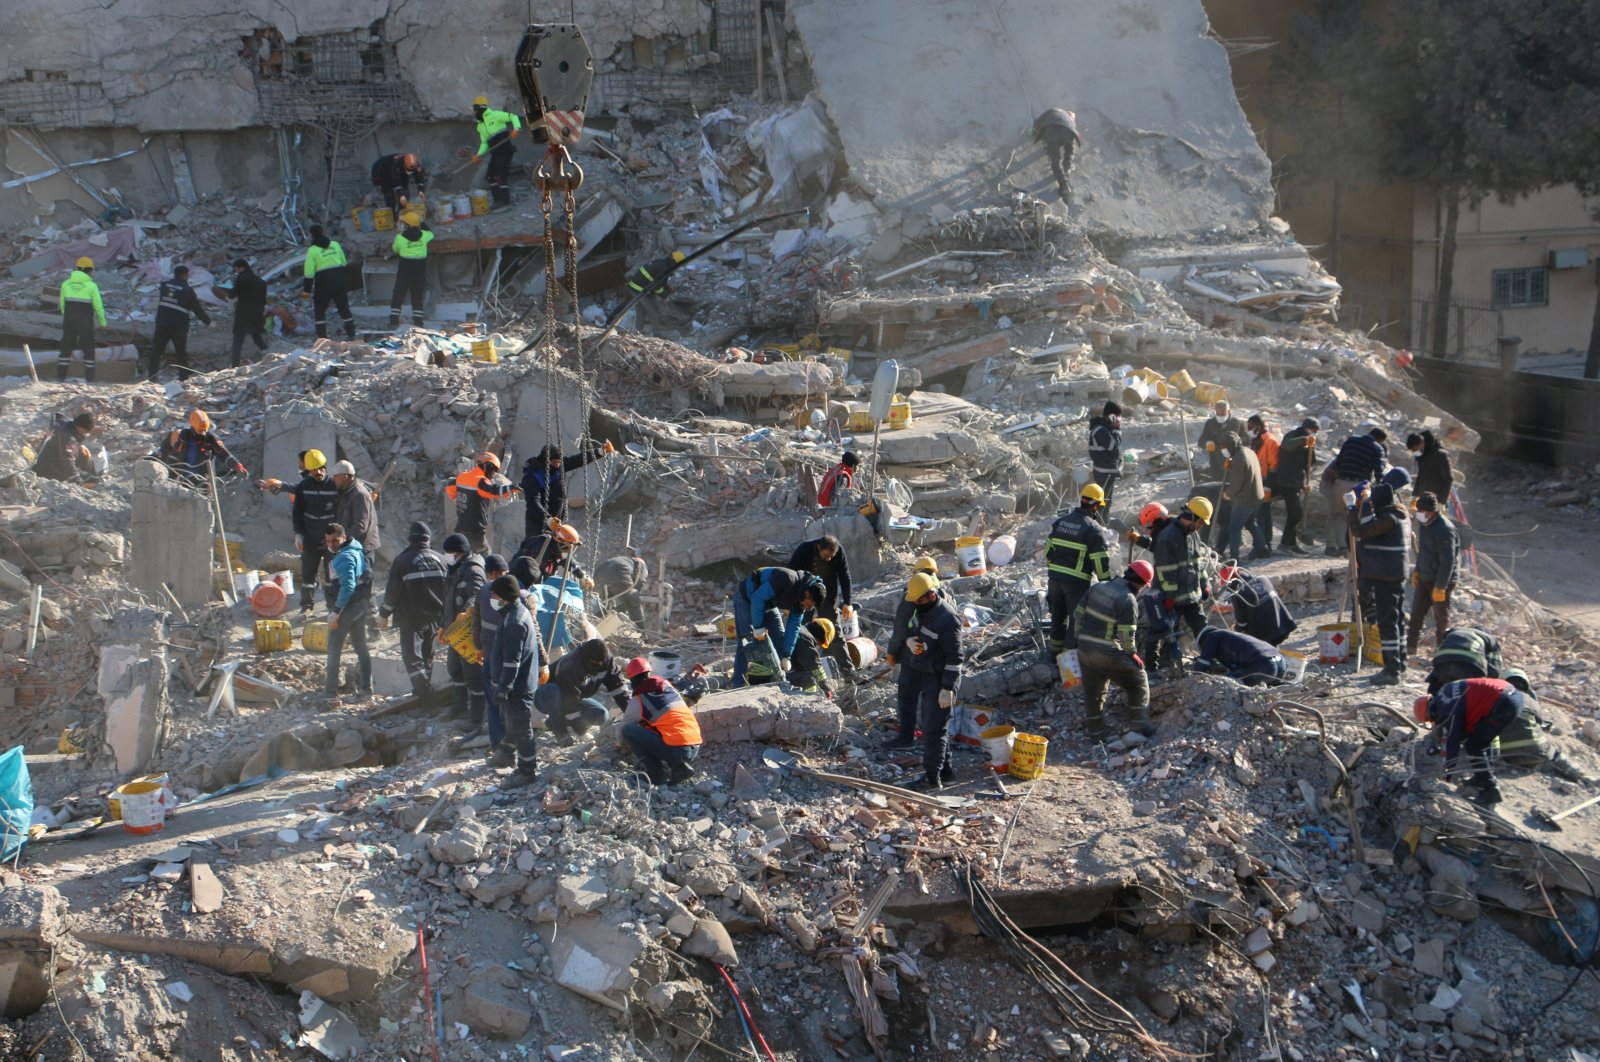 Rescue teams continue to work on the seventh day after the Feb. 6 earthquakes, in Diyarbakır, Türkiye, Feb. 12, 2023. (IHA Photo)